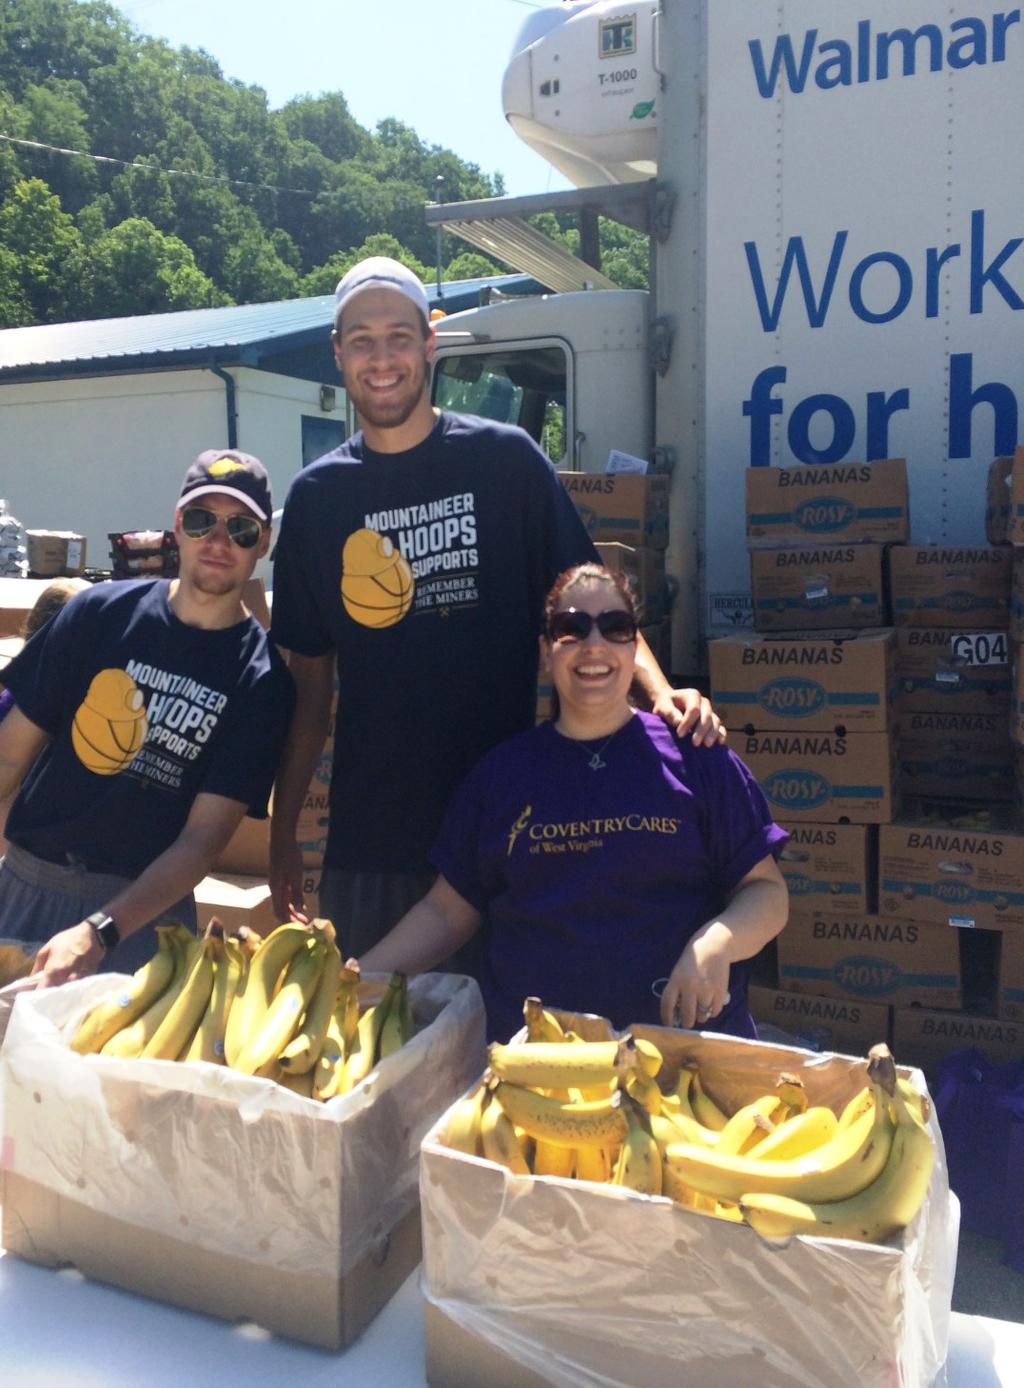 CCWV Provider News Community Outreach CoventryCares of WV Helps Feed Those In Need On June 7, 2016, members of the CoventryCares of West Virginia Community Outreach team spearheaded an effort to